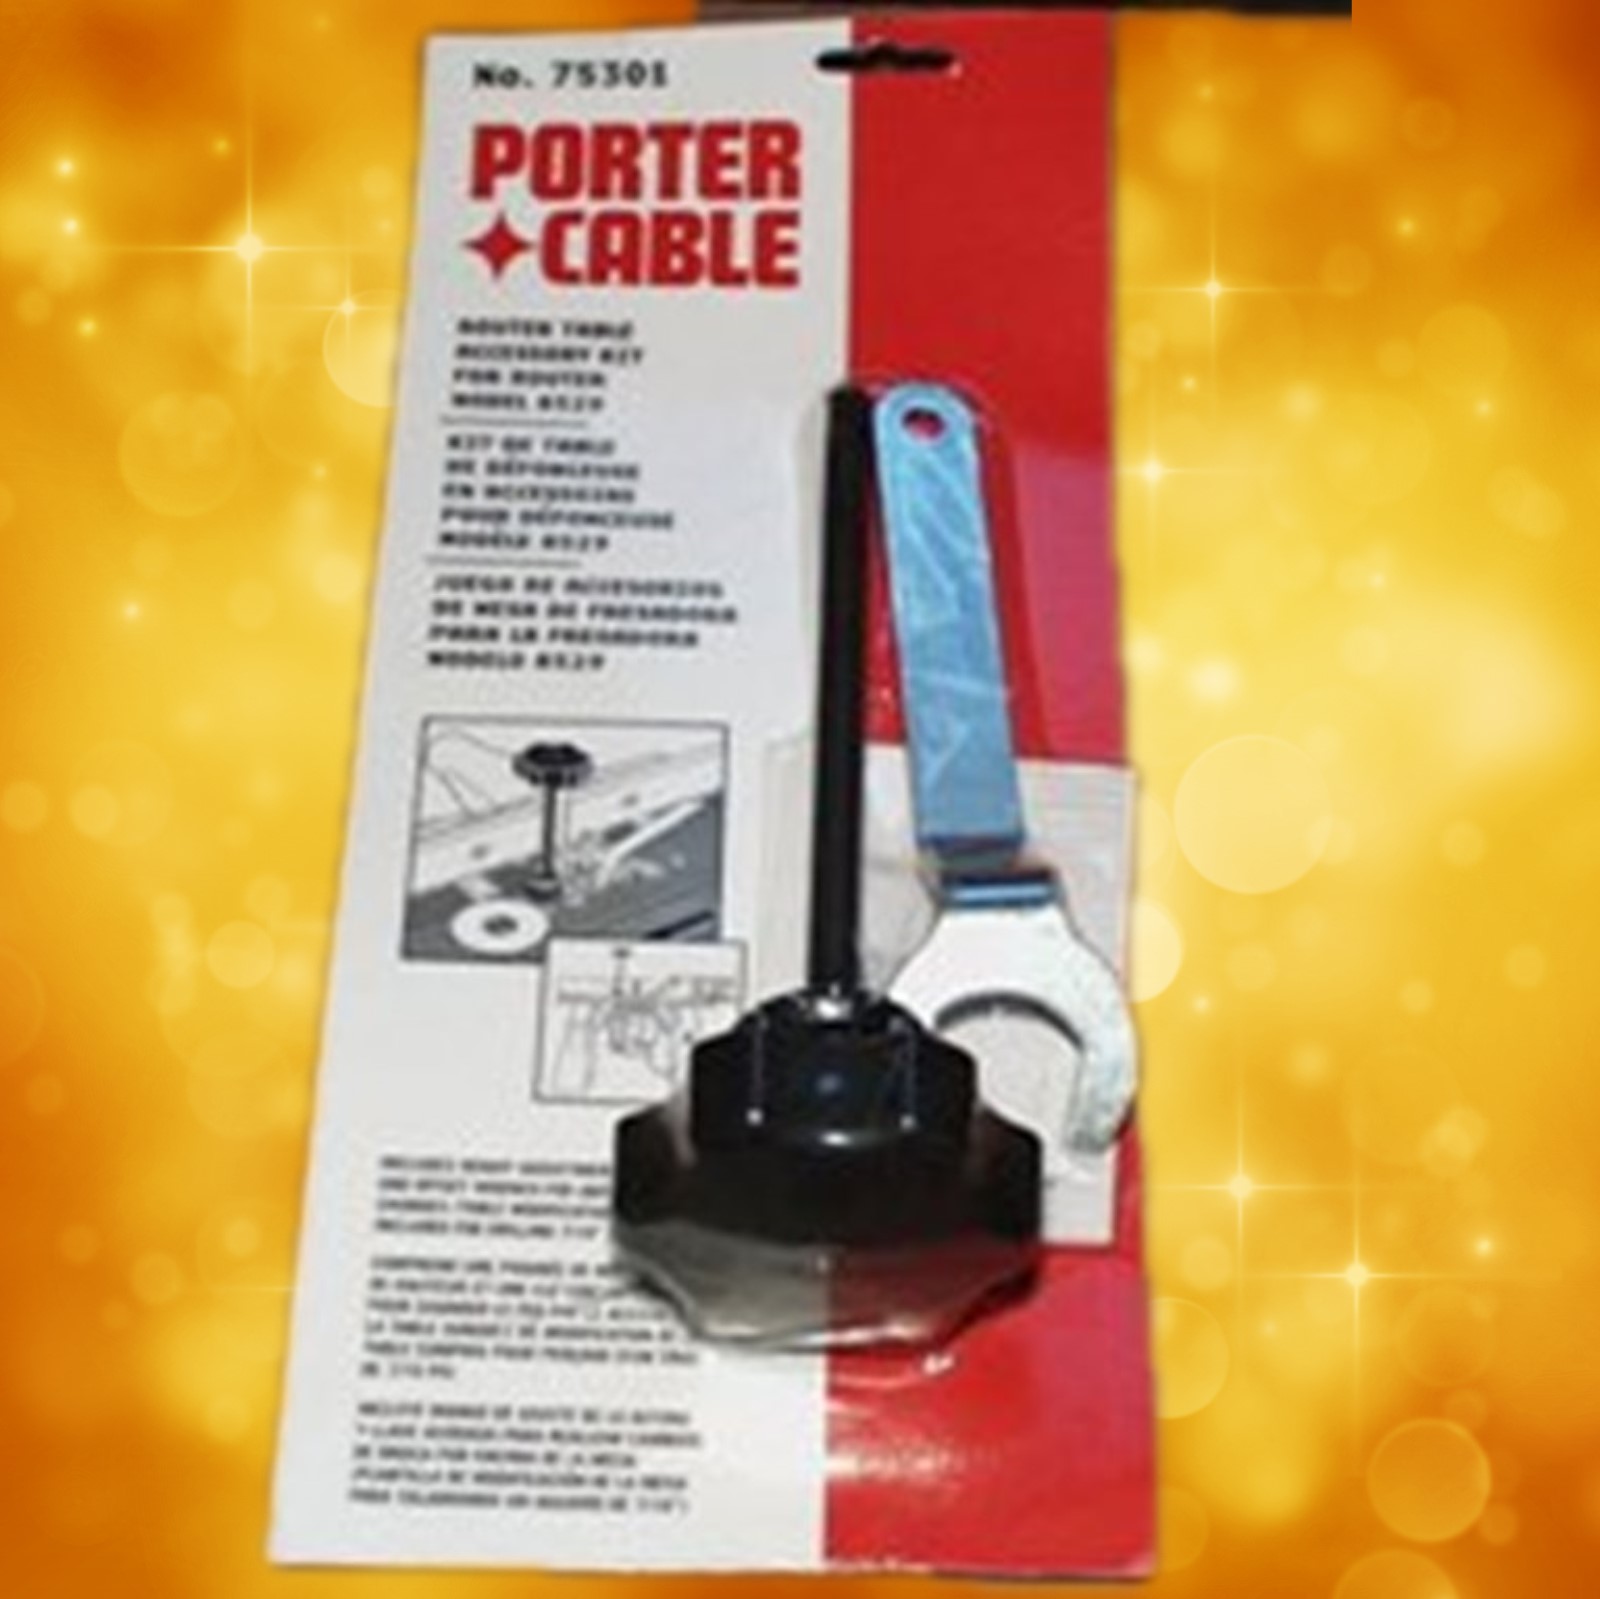 Porter Cable Router Table Height 75301 Porter-Cable Router Table Height Adjuster 75301